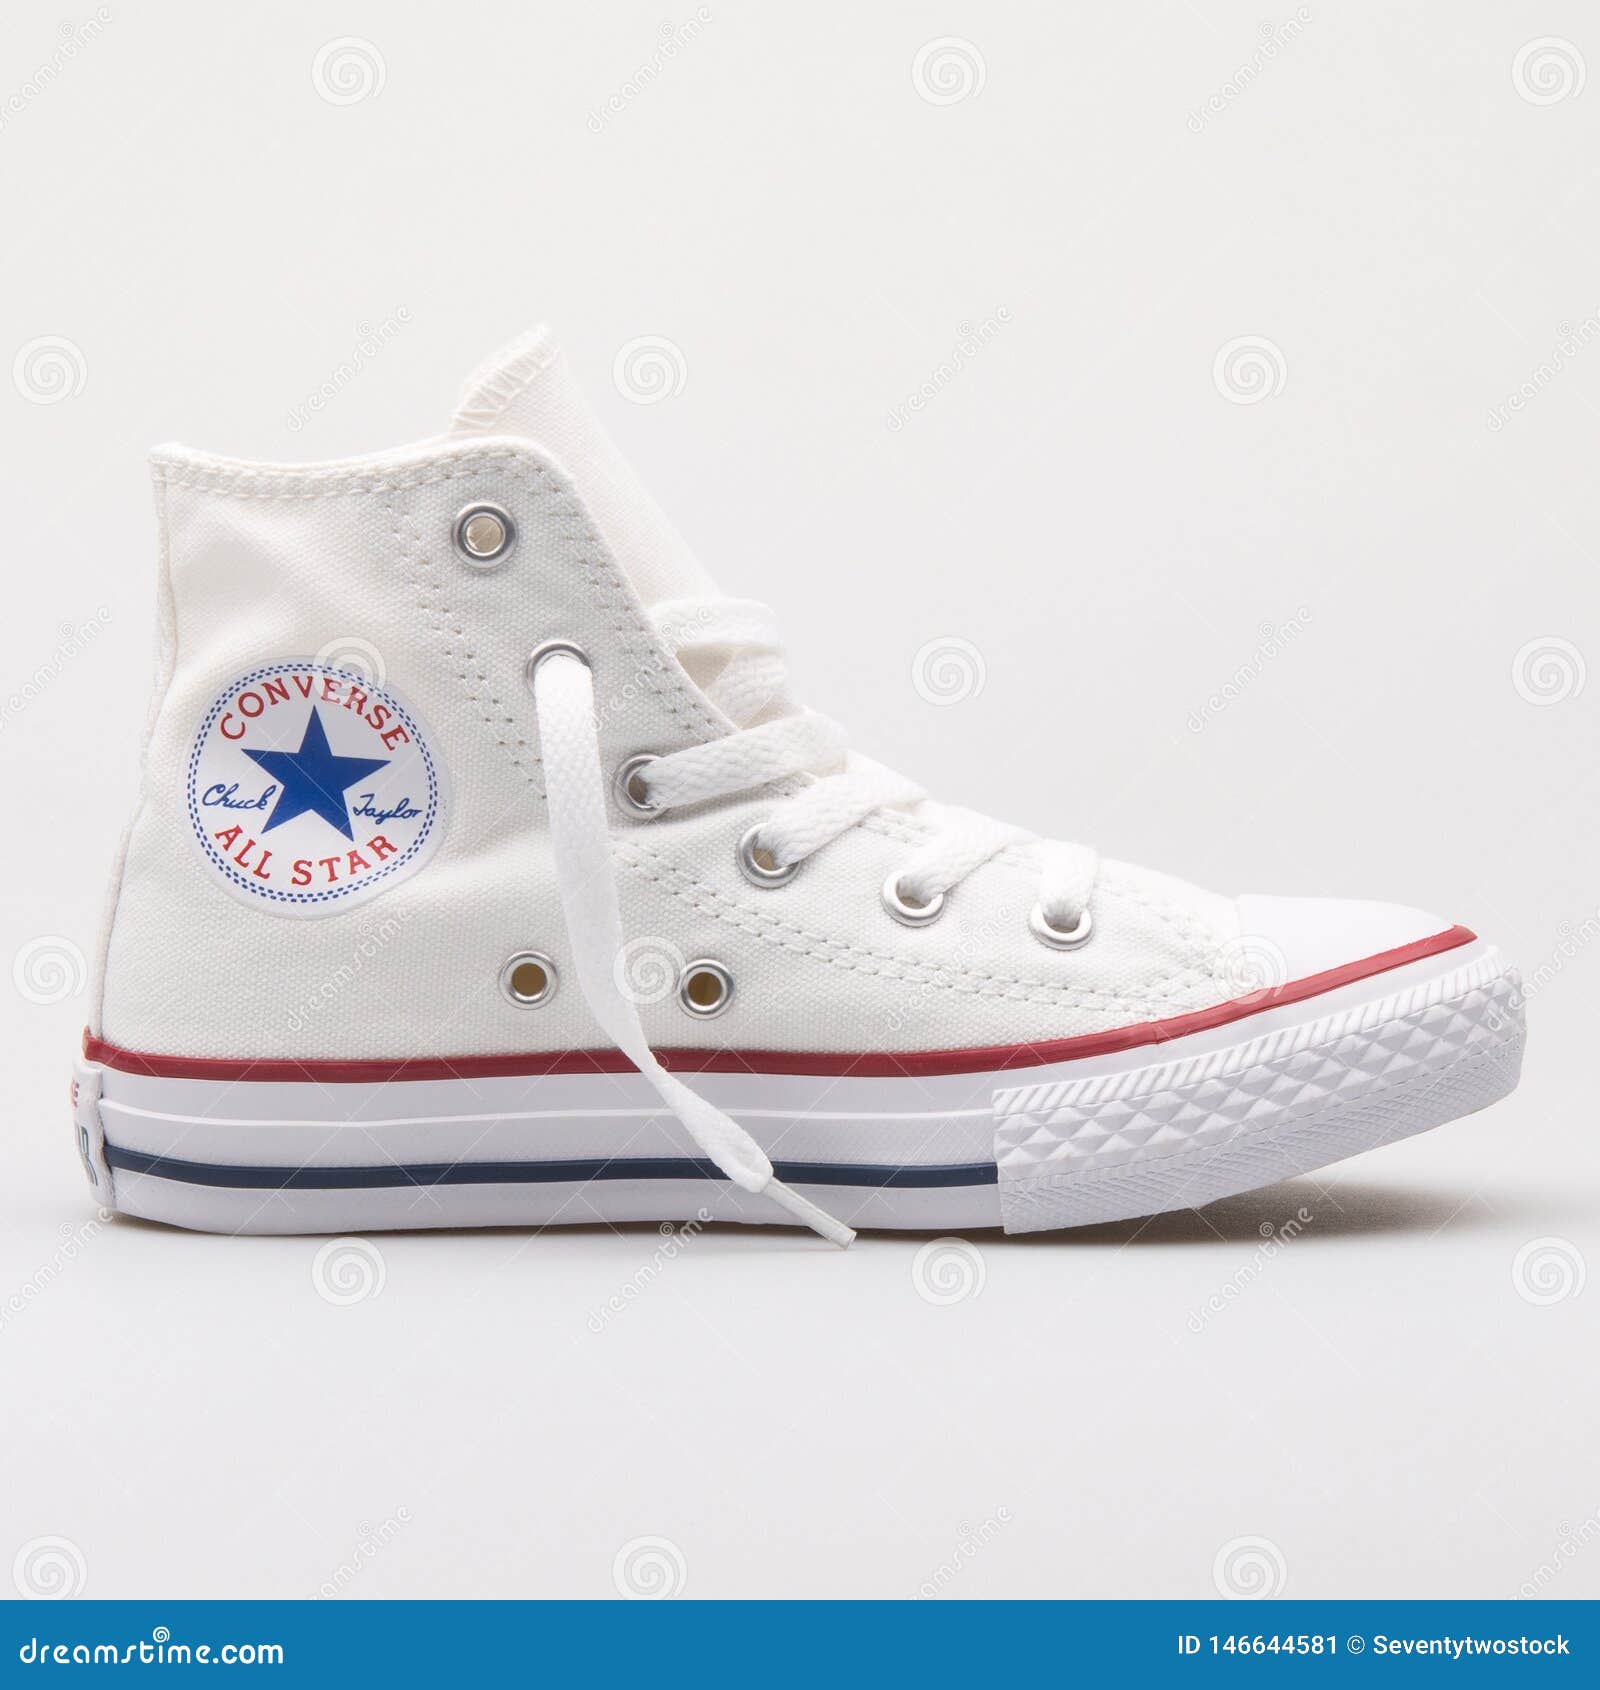 Converse Chuck Taylor All Star Core High White Sneaker Editorial Photo -  Image of chuck, product: 146644581